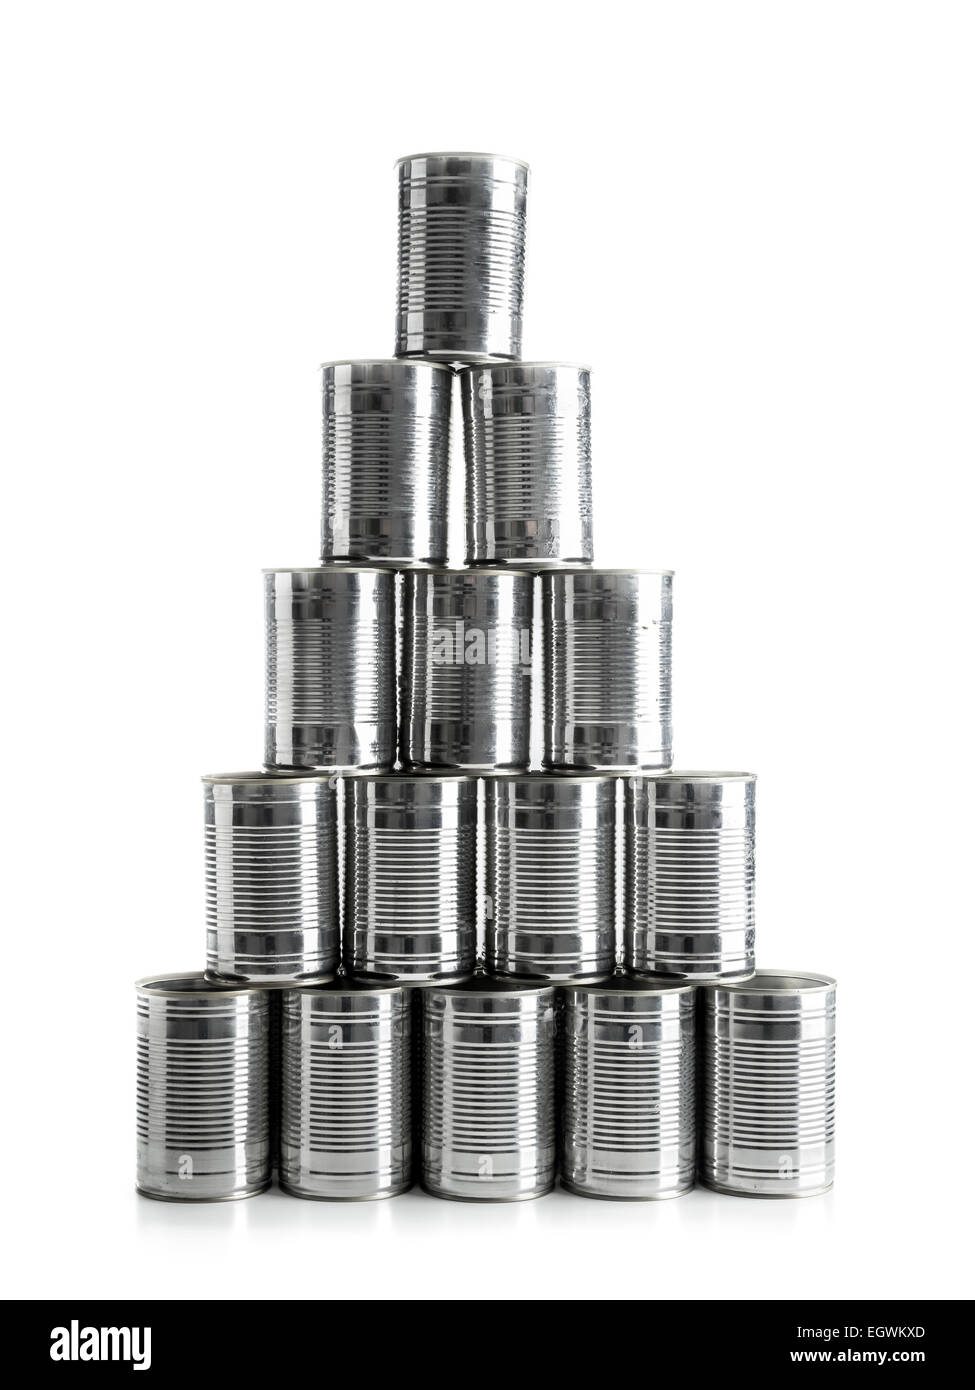 Pyramid of empty food cans shot on white background Stock Photo